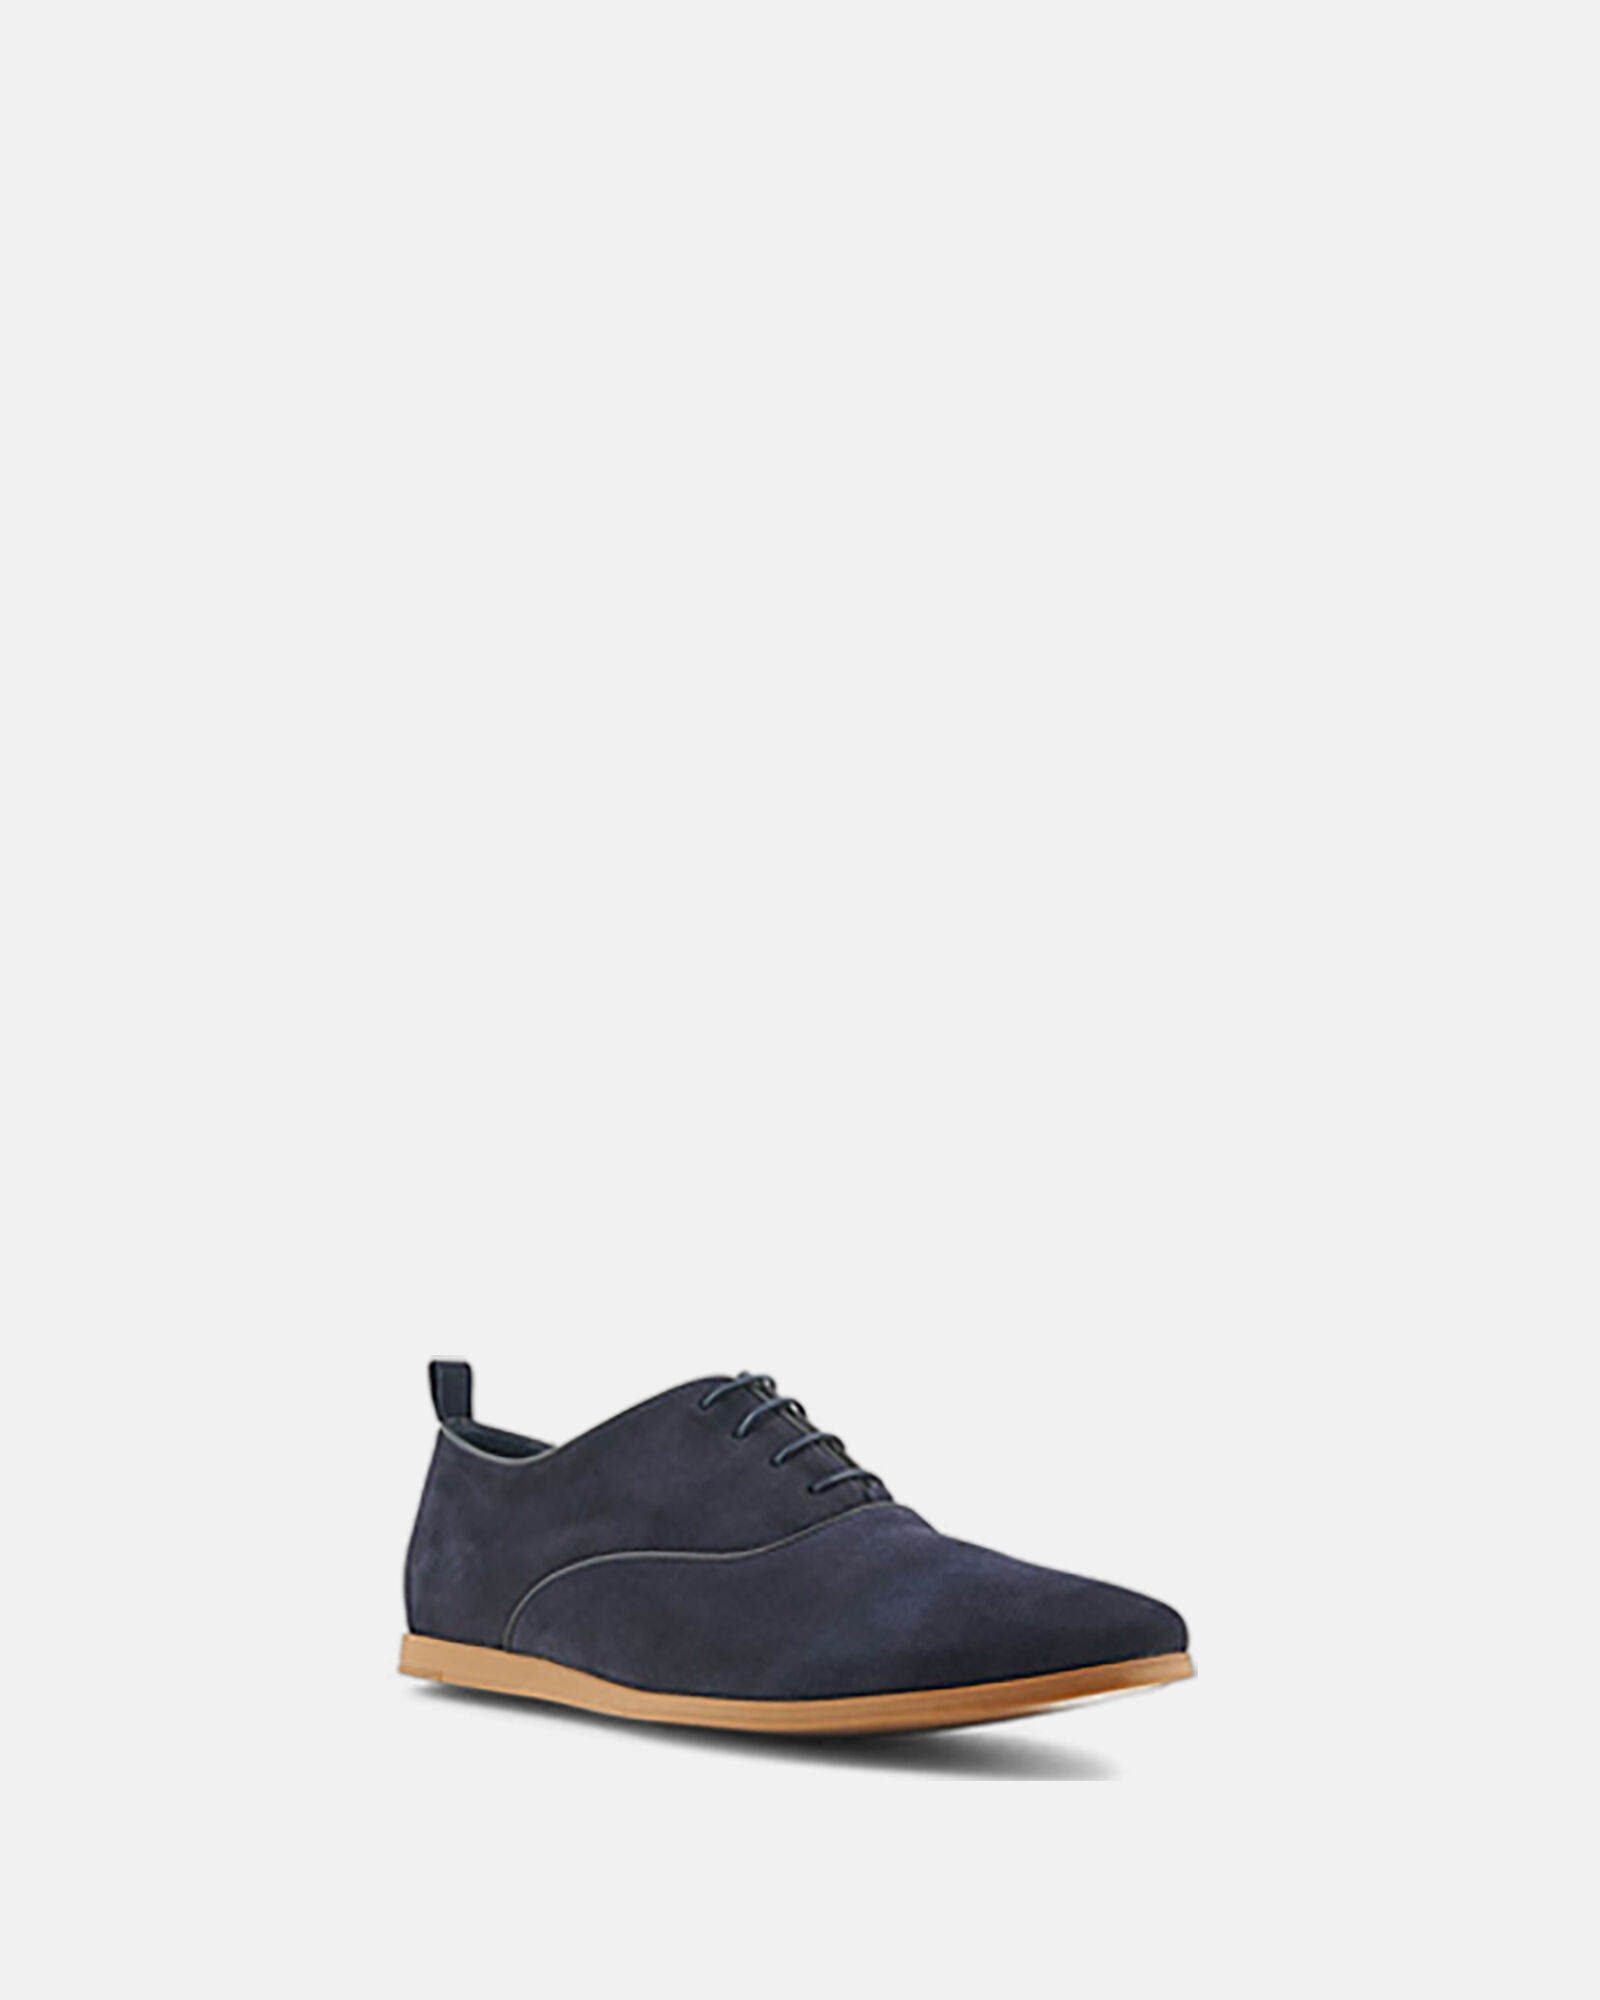 OXFORD SHOE - MESSON NAVY BLUE - Oxford shoes - Minelli